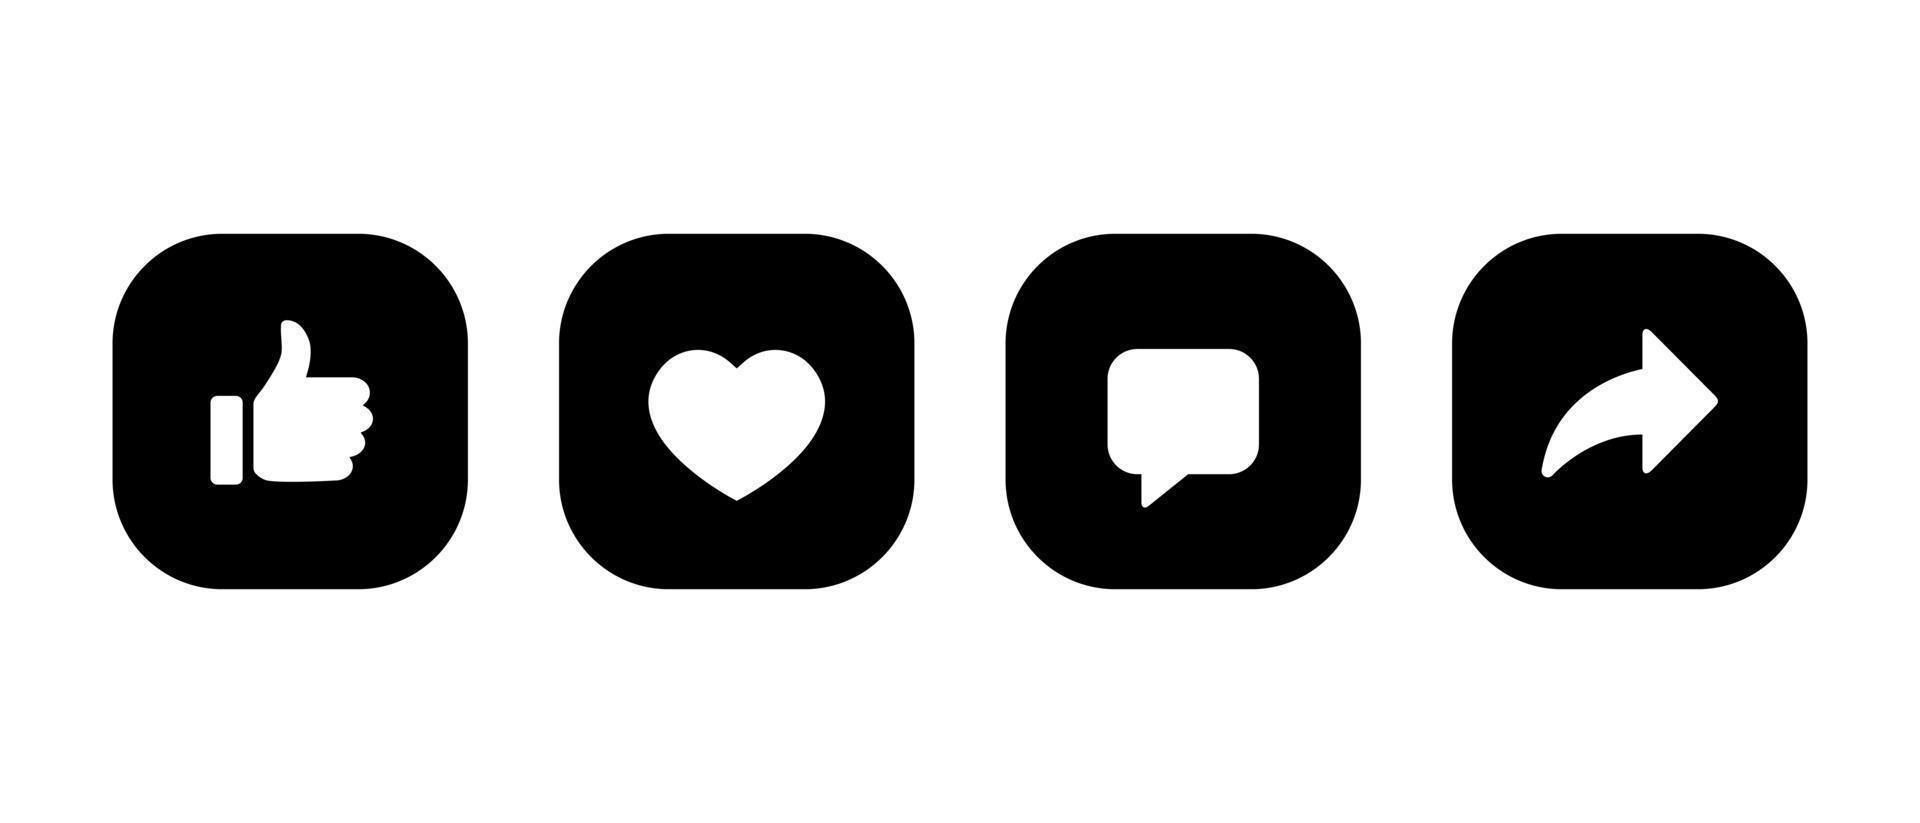 https://static.vecteezy.com/system/resources/previews/010/703/132/non_2x/like-love-comment-and-share-icon-on-square-button-social-media-elements-vector.jpg